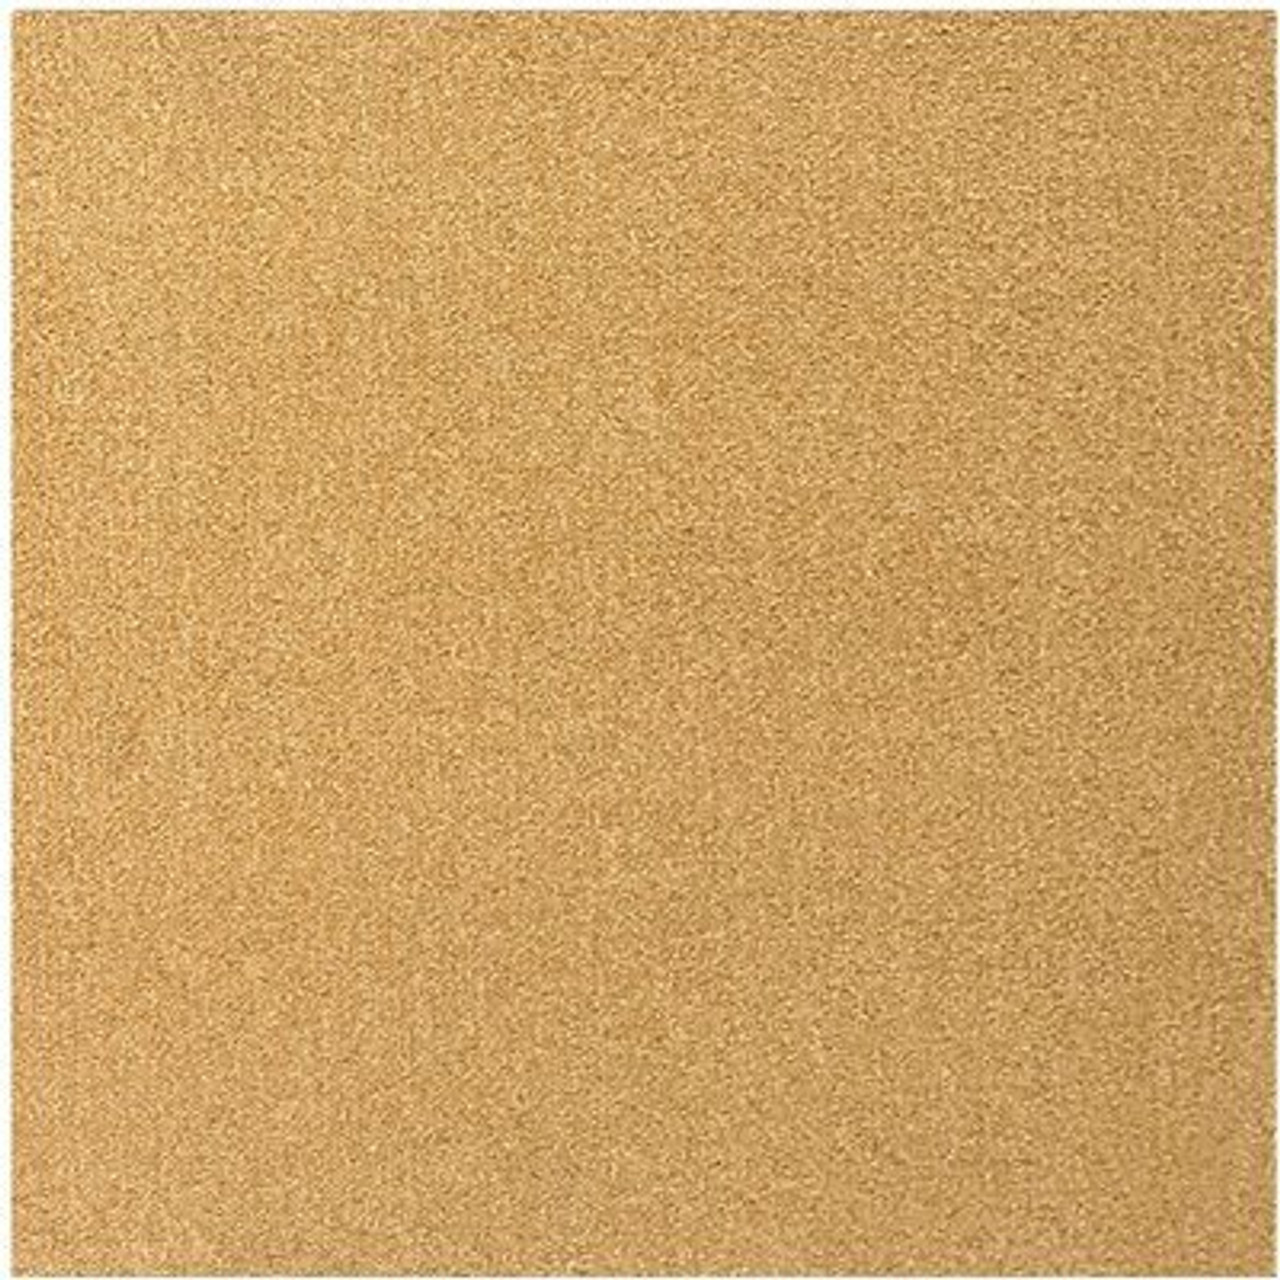 Dip Ray Commercial/Residential 19.7 In. X 19.7 In. Adhesive Tab Carpet Tile Squares (4 Tiles/10.7 Sq Ft.)